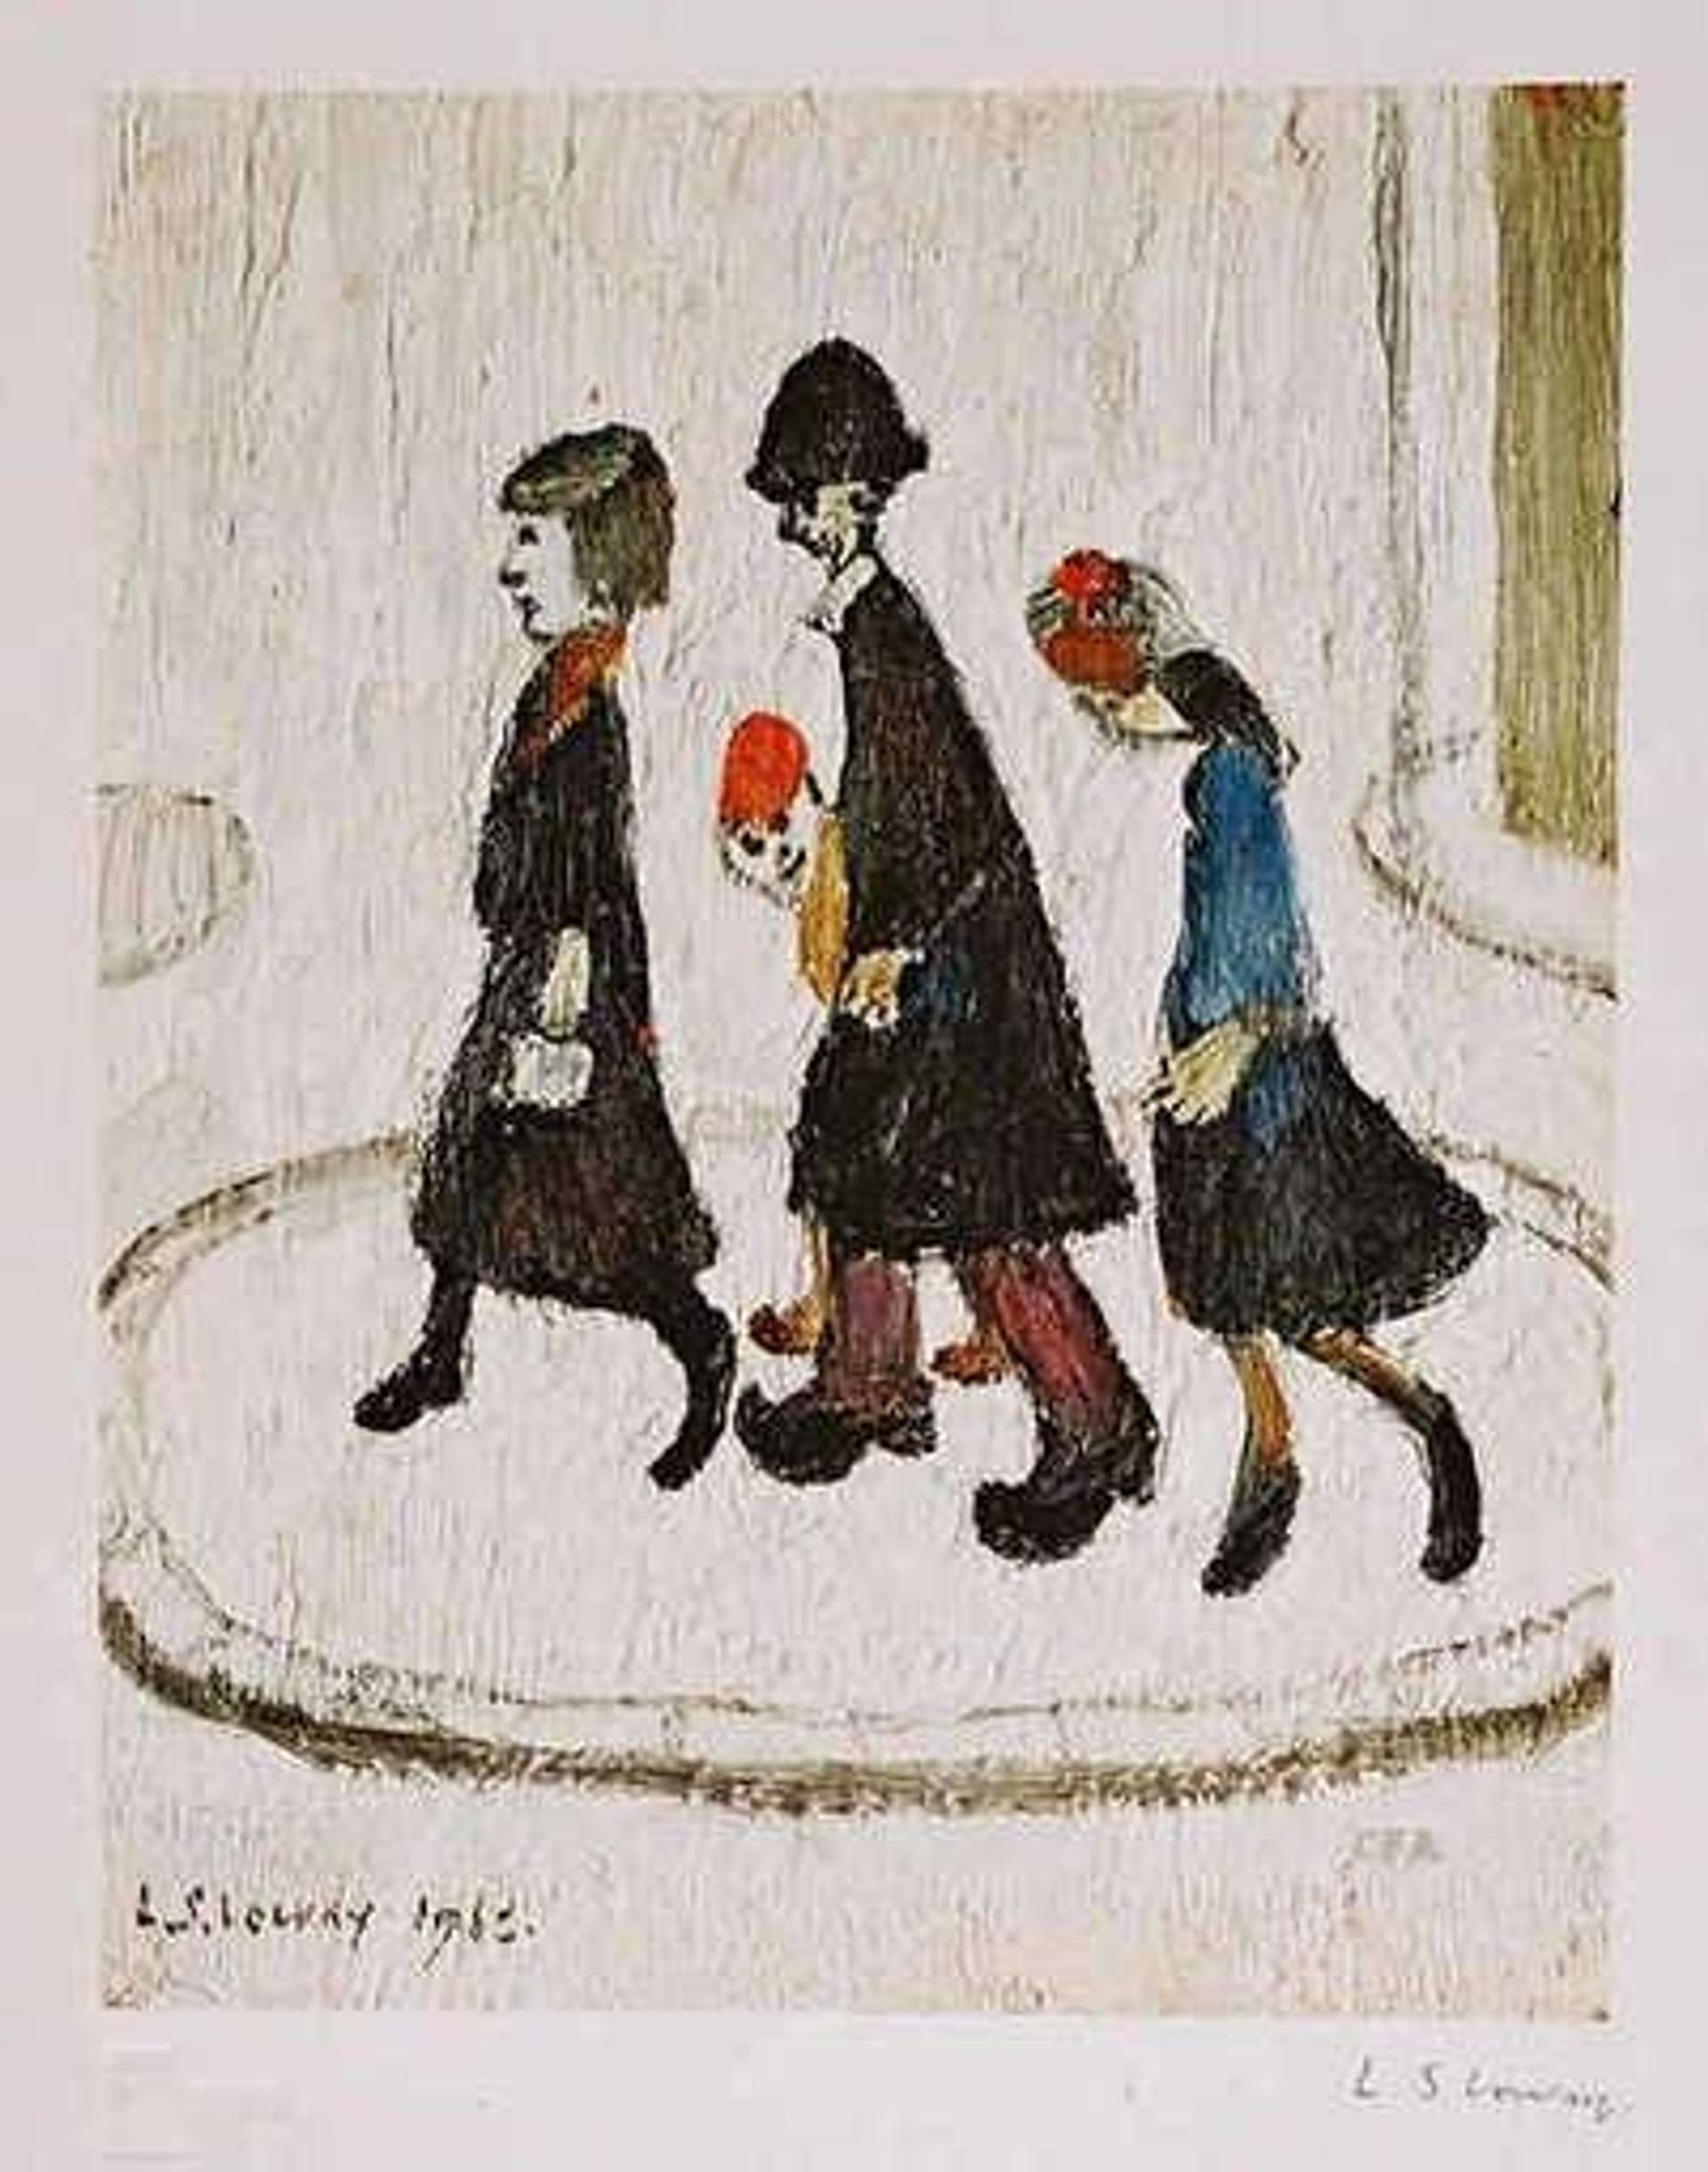 L.S. Lowry’s The Family. A lithograph of four family members walking together on a local street. 